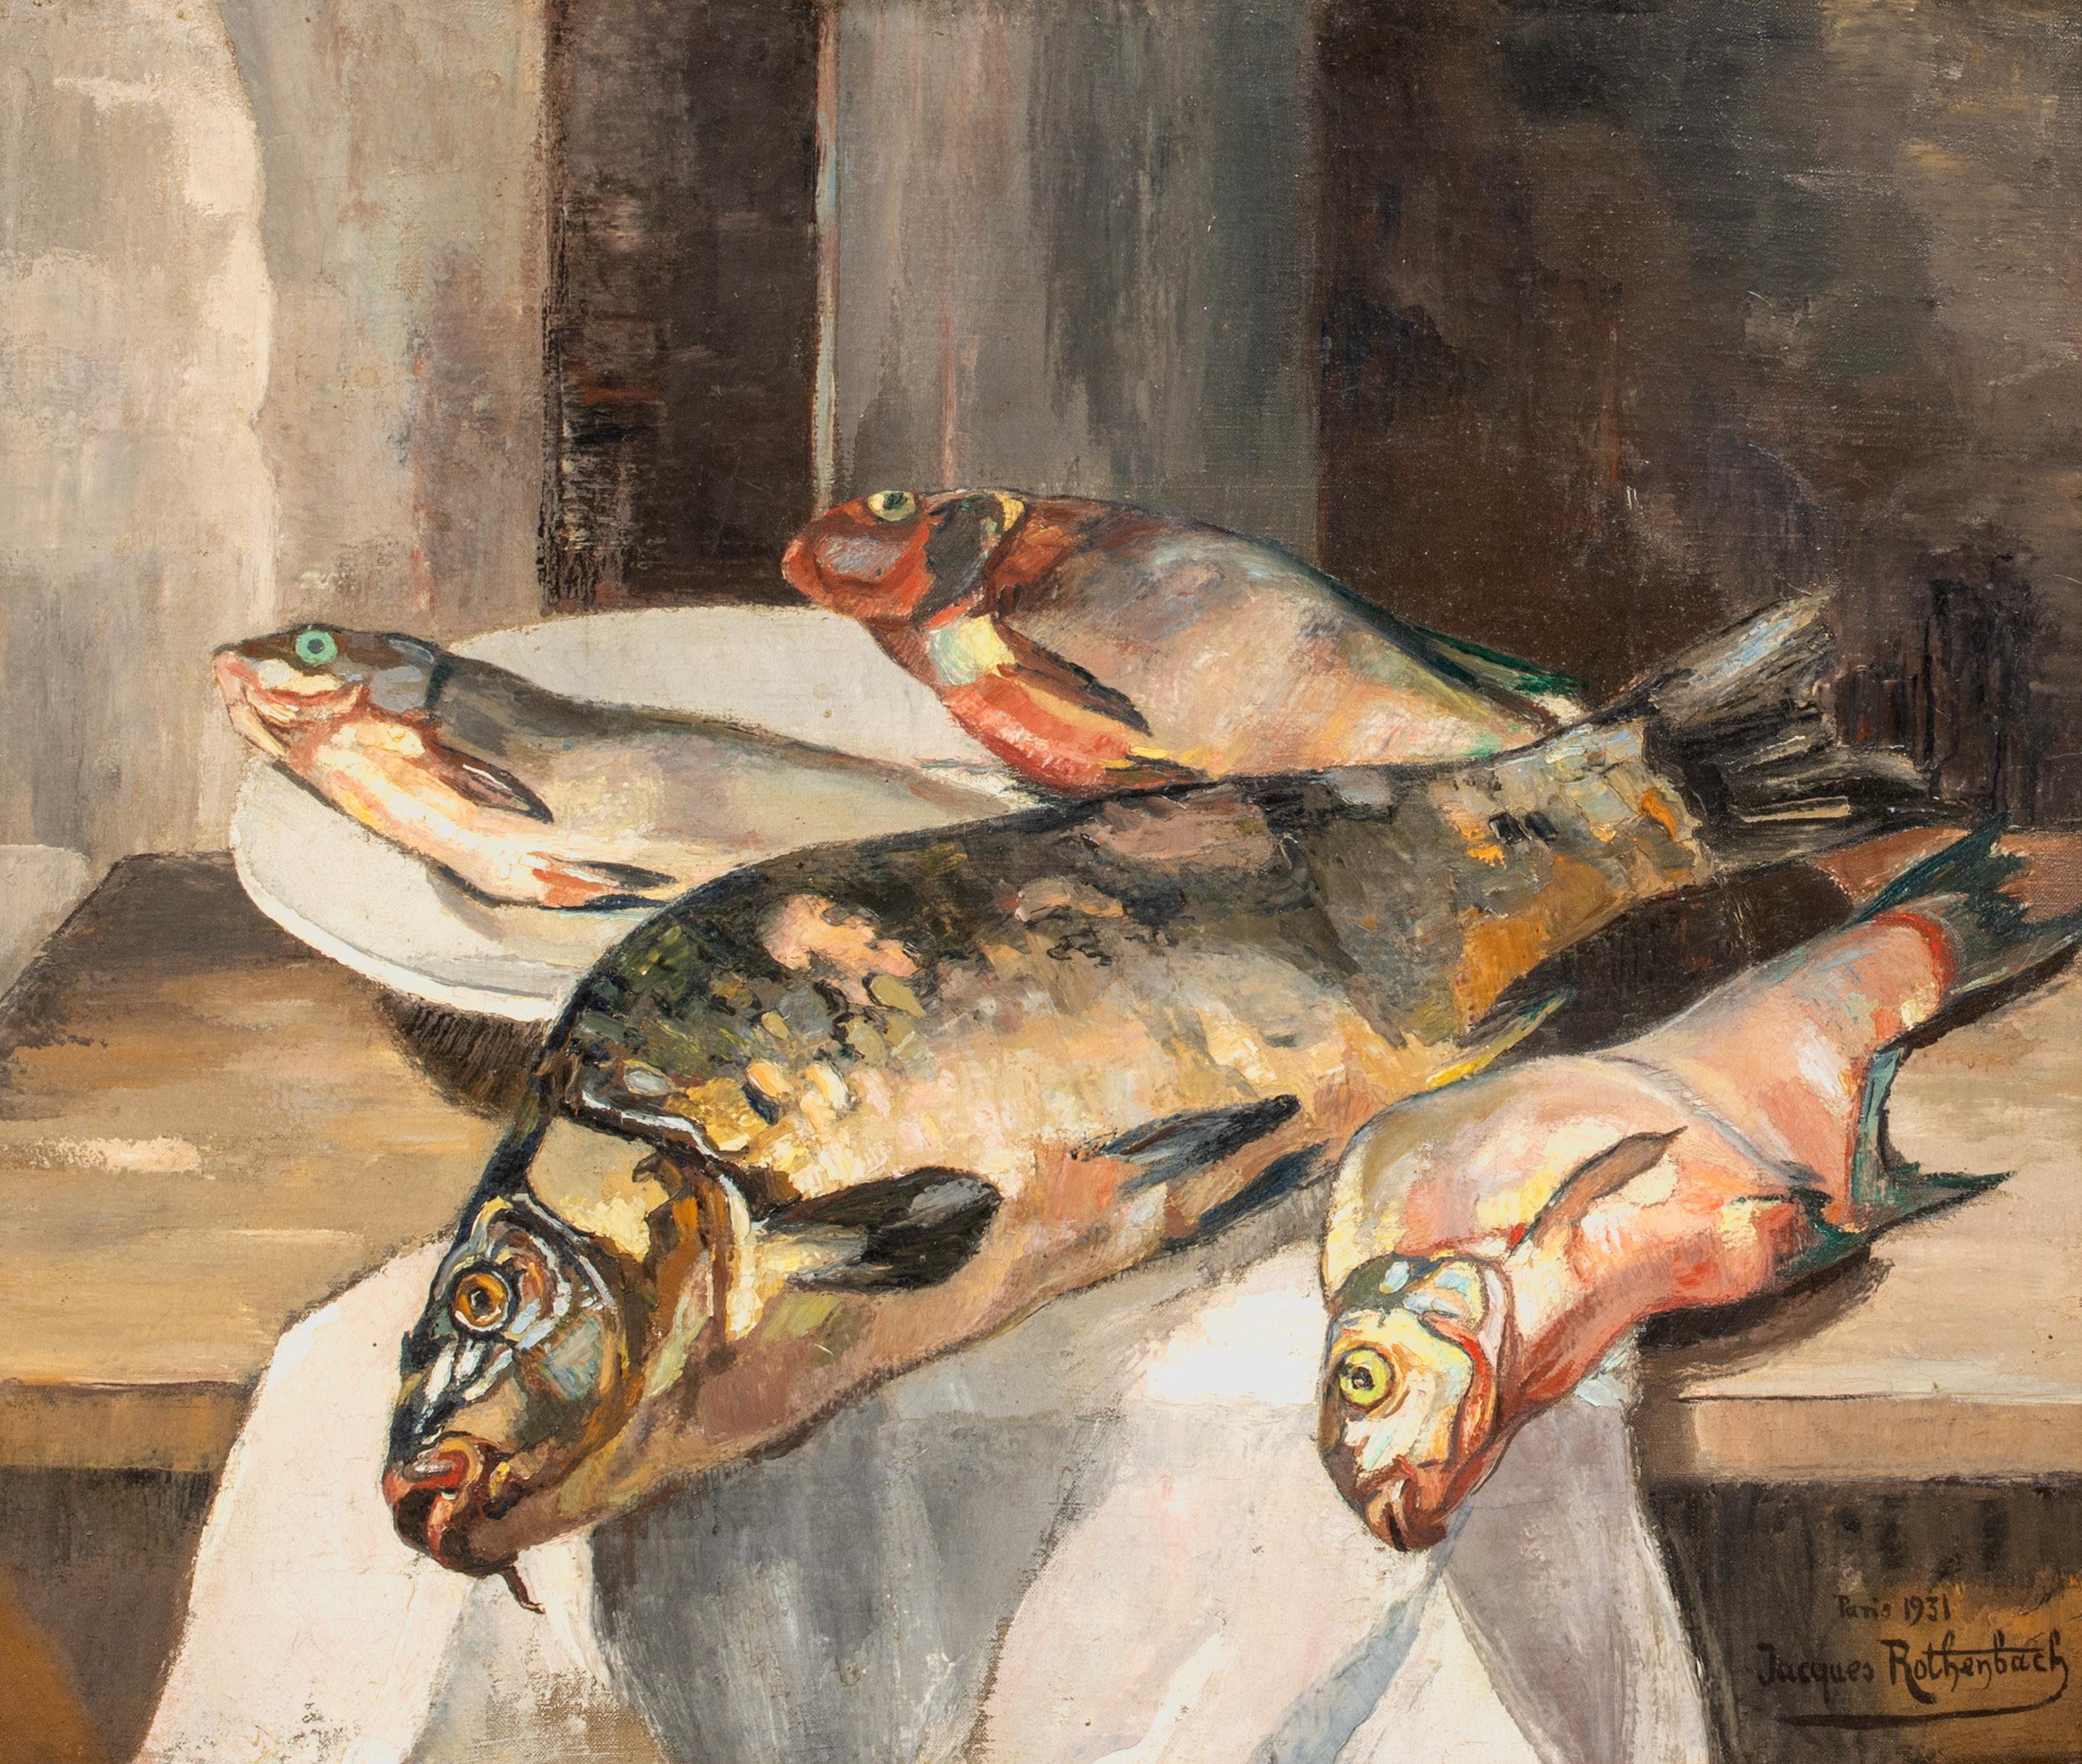 Still Life Of Fish, dates 1931

by Jacques Rothenbach

Large 1931 French School still life of fish in a kitchen, oil on canvas by Jacques Rothenbach. Excellent quality and condition early 20th century study of the fish painted with bold detail and